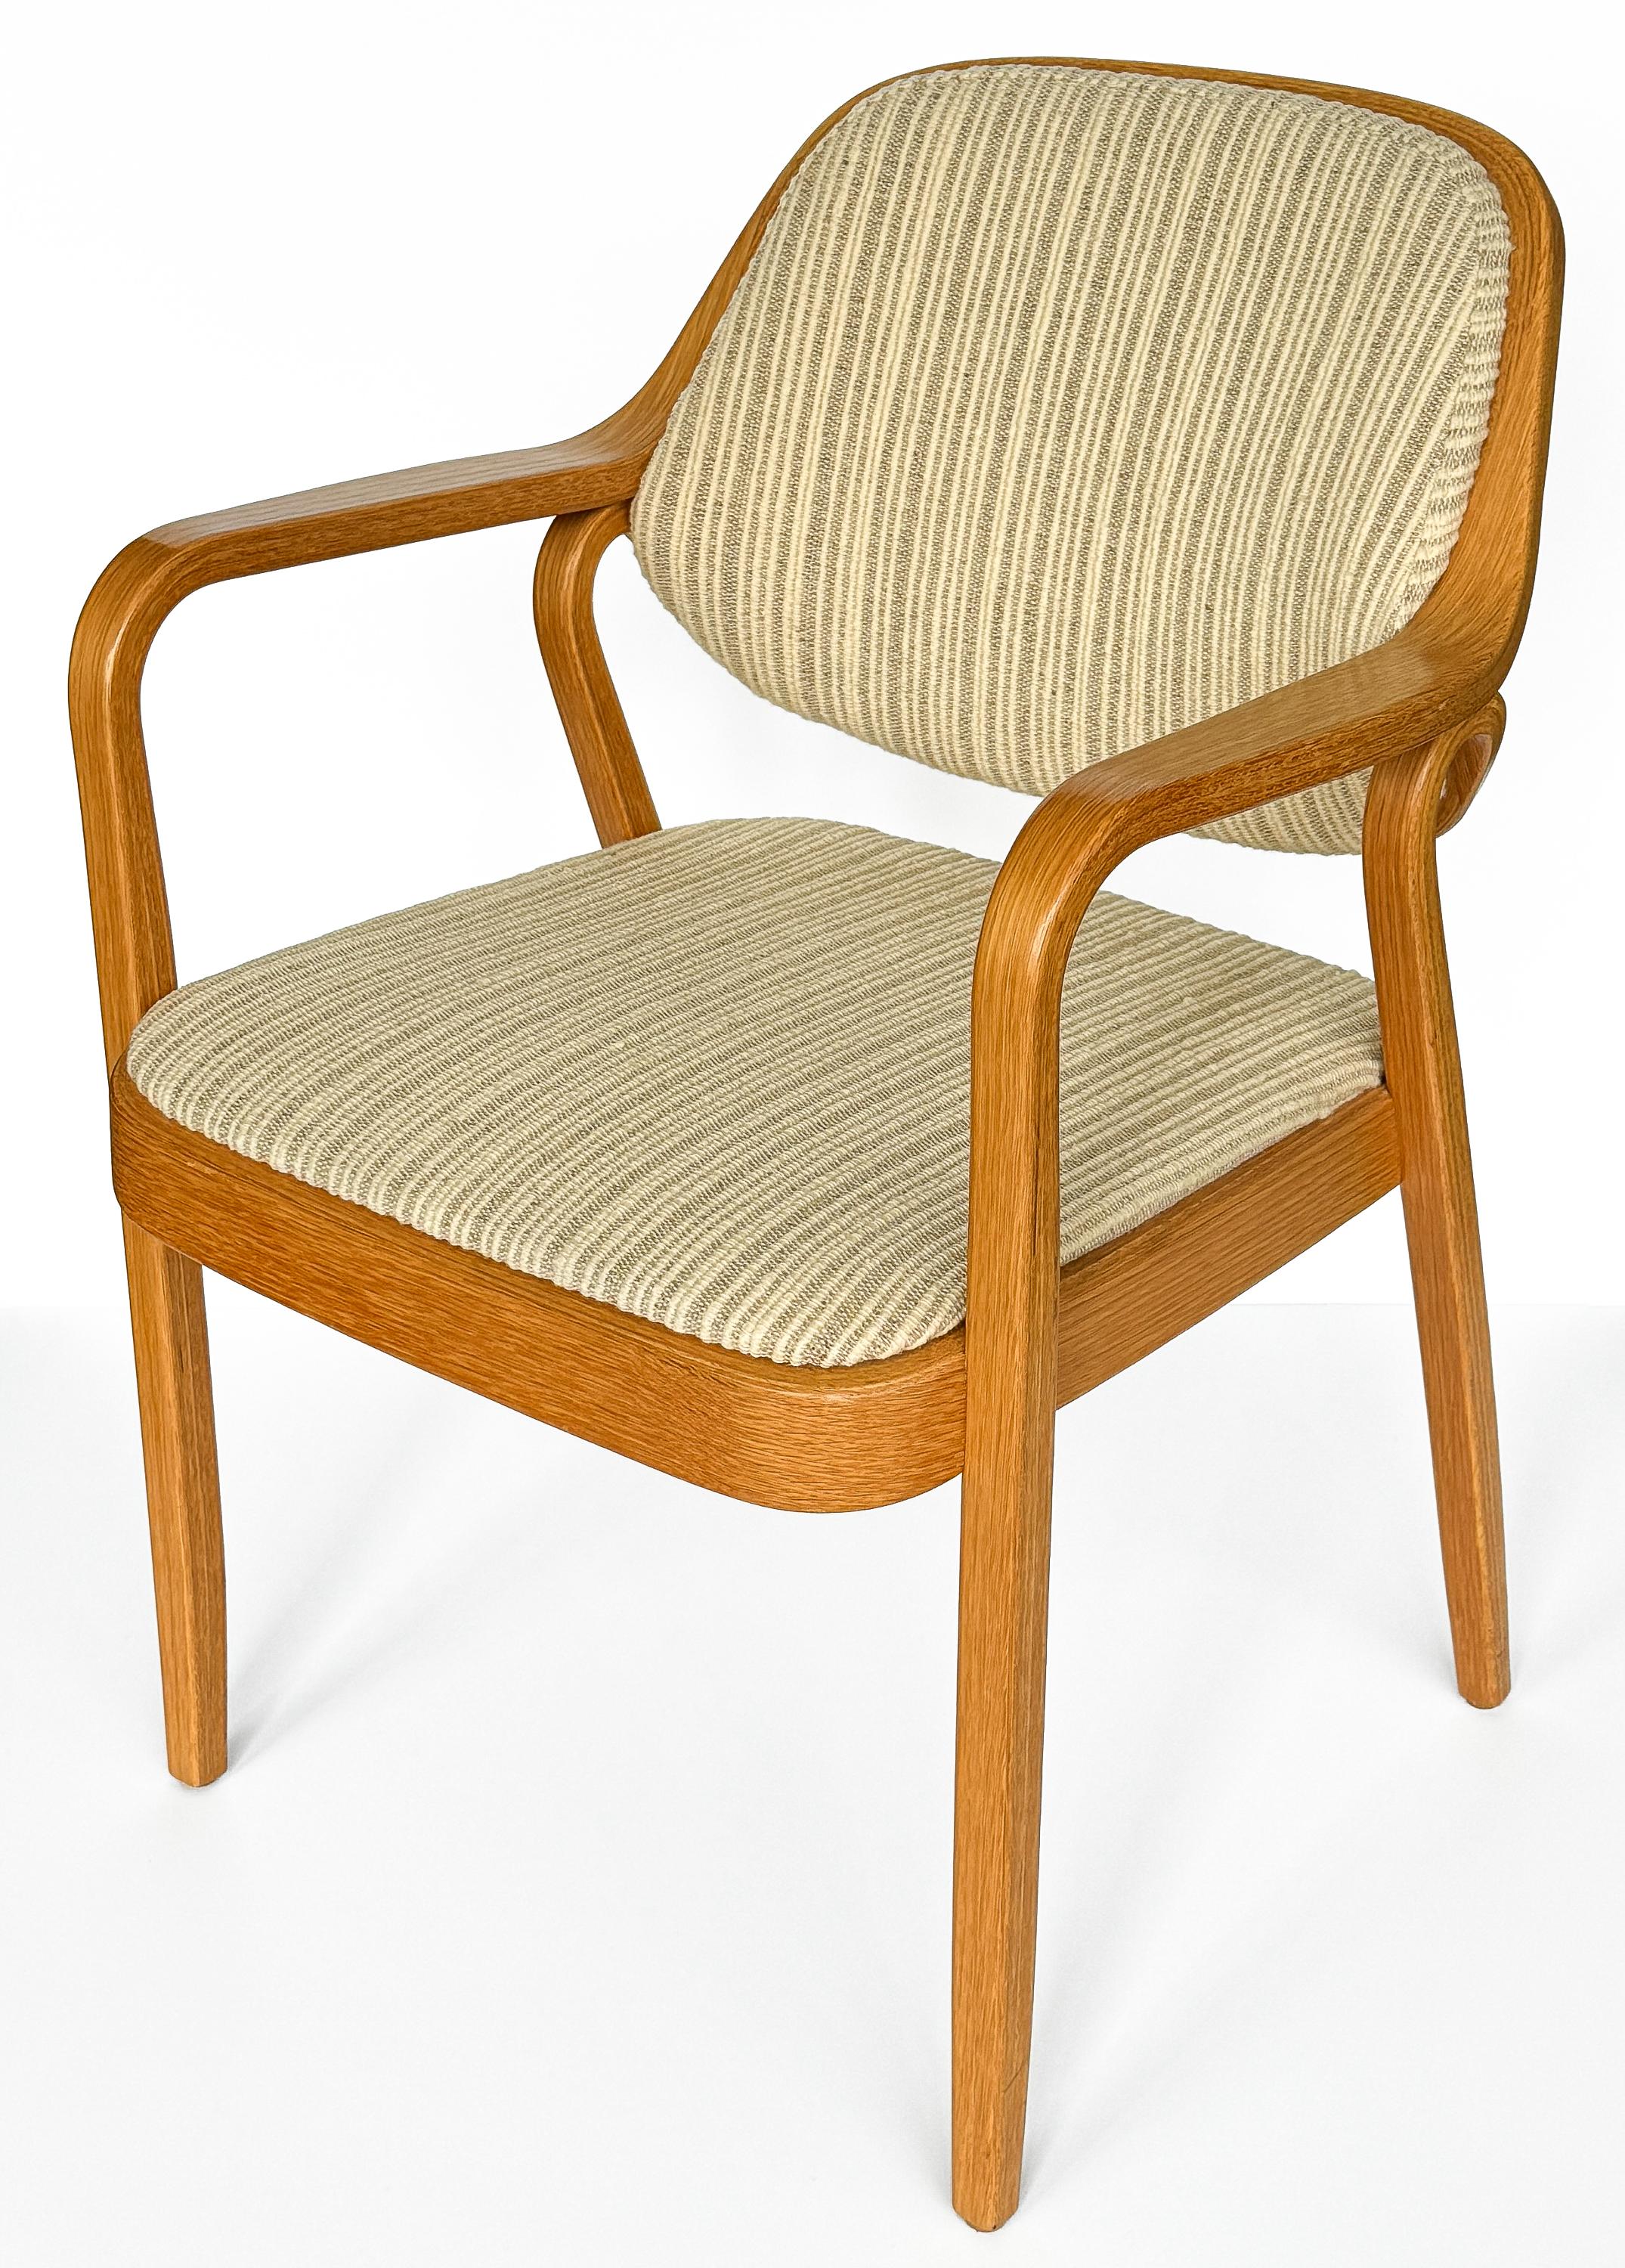 This set of eight bentwood oak dining armchairs by Don Pettit for Knoll, circa 1970s, epitomizes the elegance of mid-century modern design. Model 1105 is a testament to the ingenuity of its era, seamlessly blending form with function in a style that